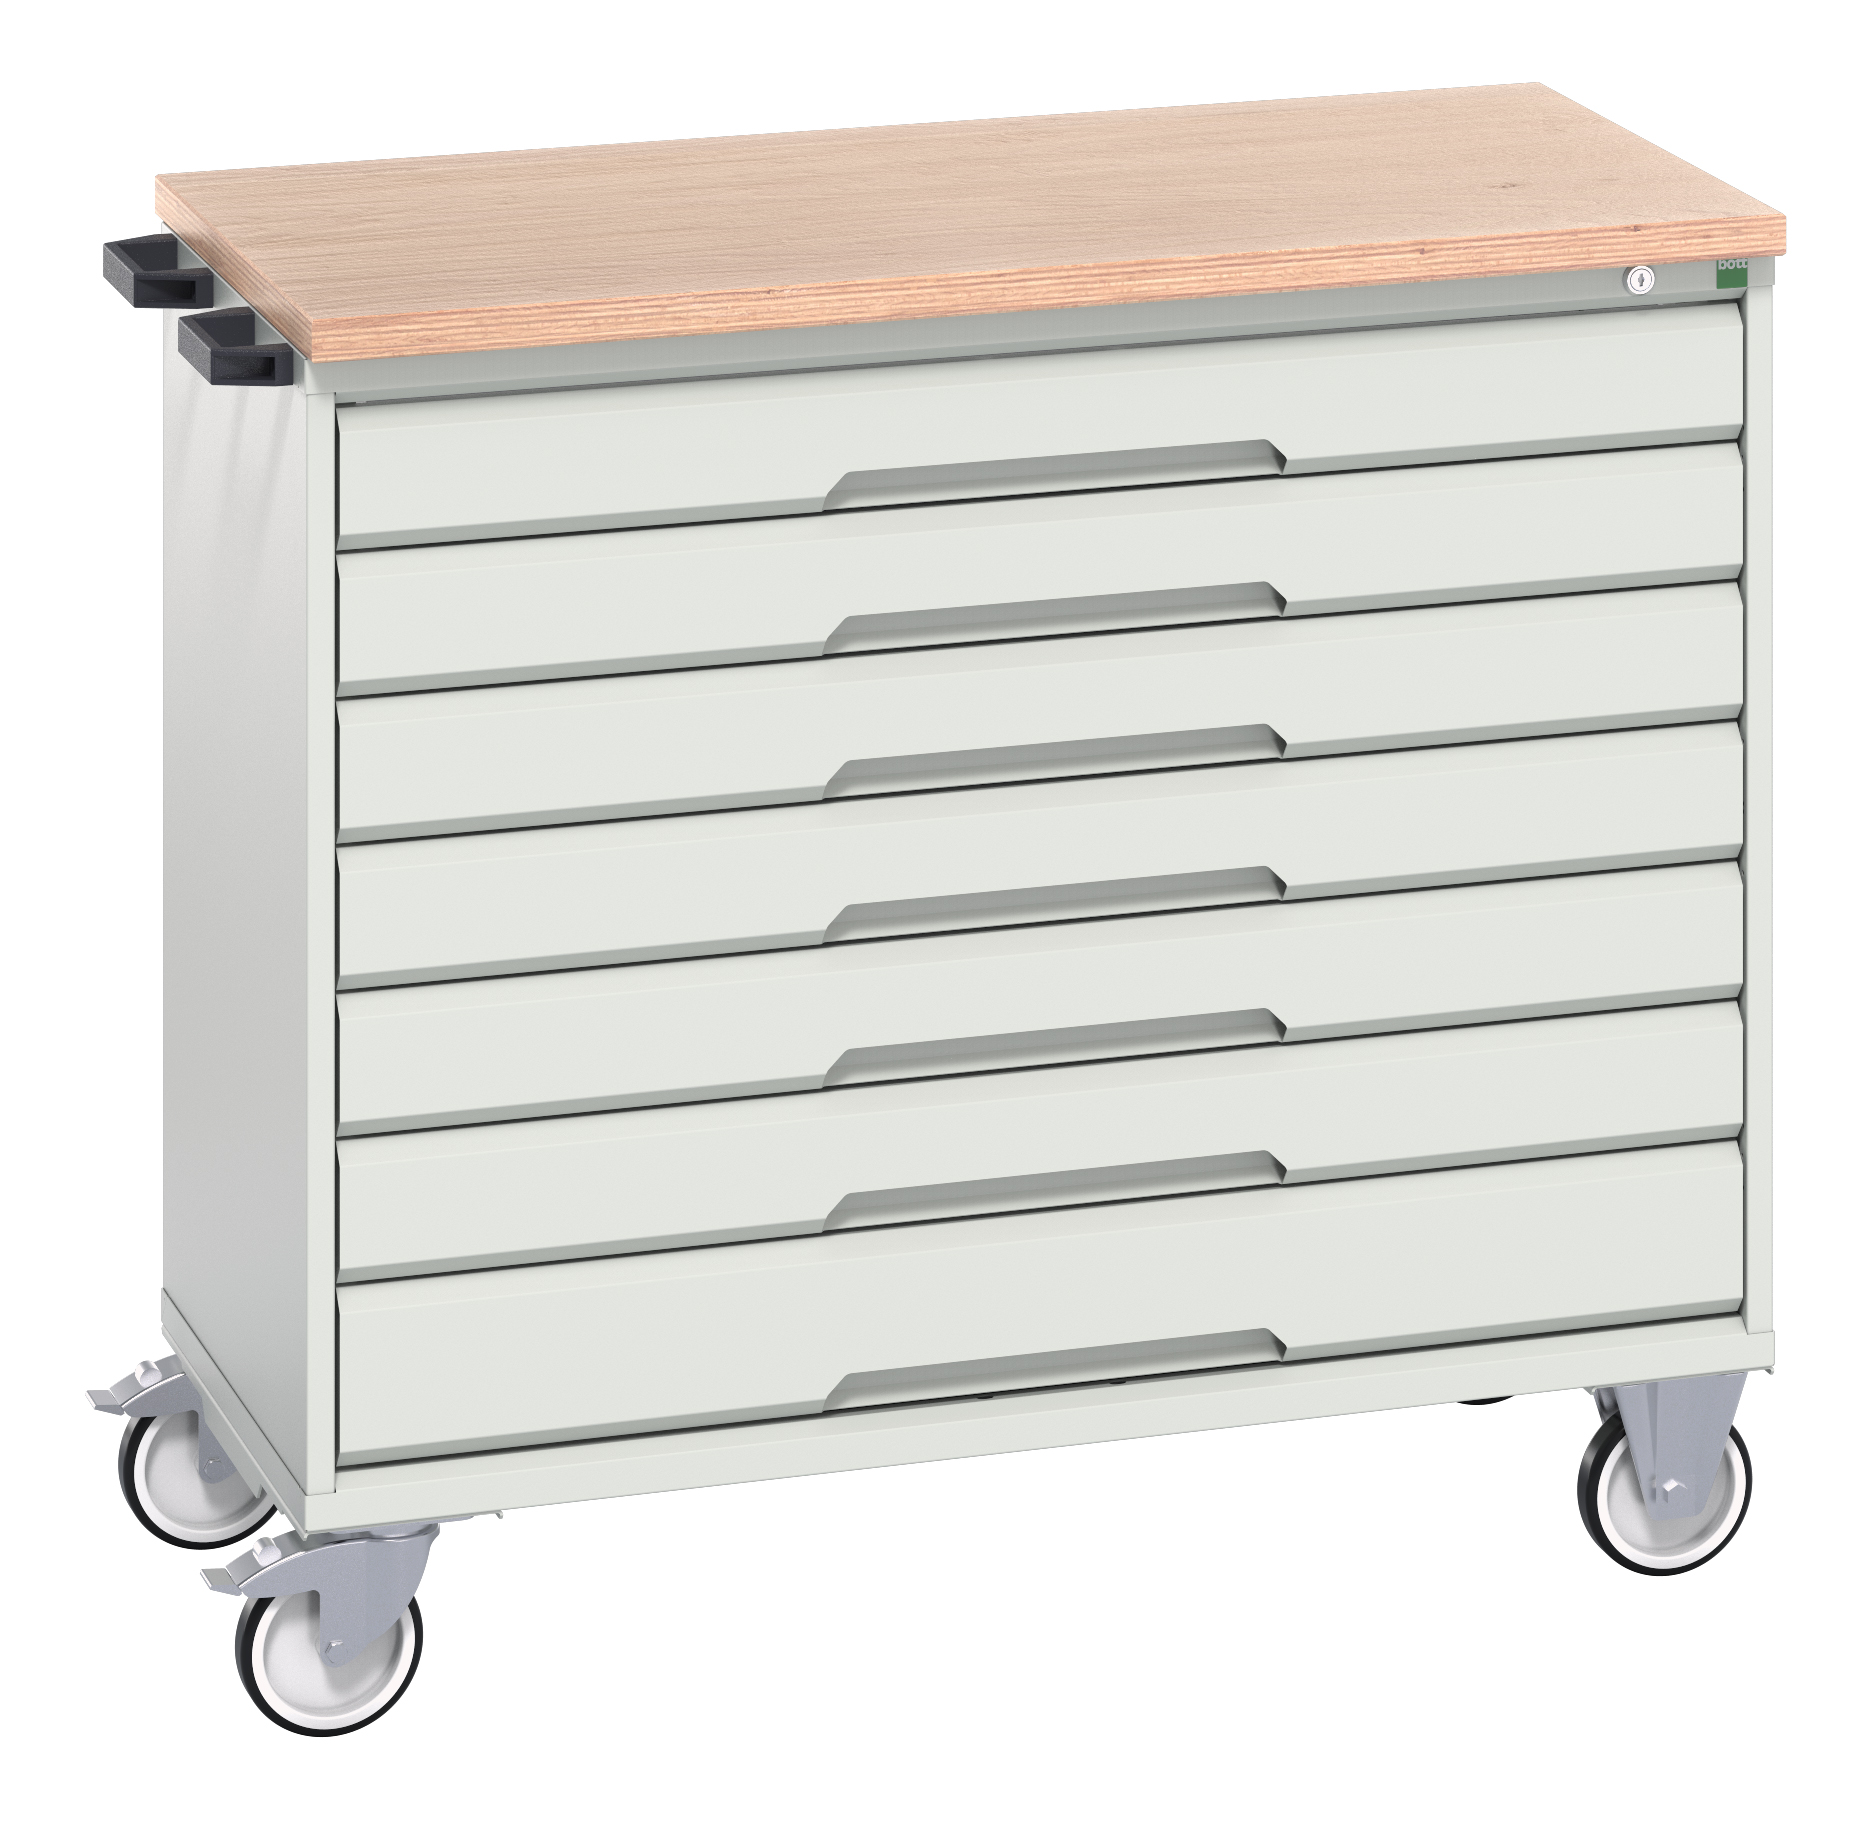 Bott Verso Mobile Drawer Cabinet With 7 Drawers & Multiplex Top - 16927057.16